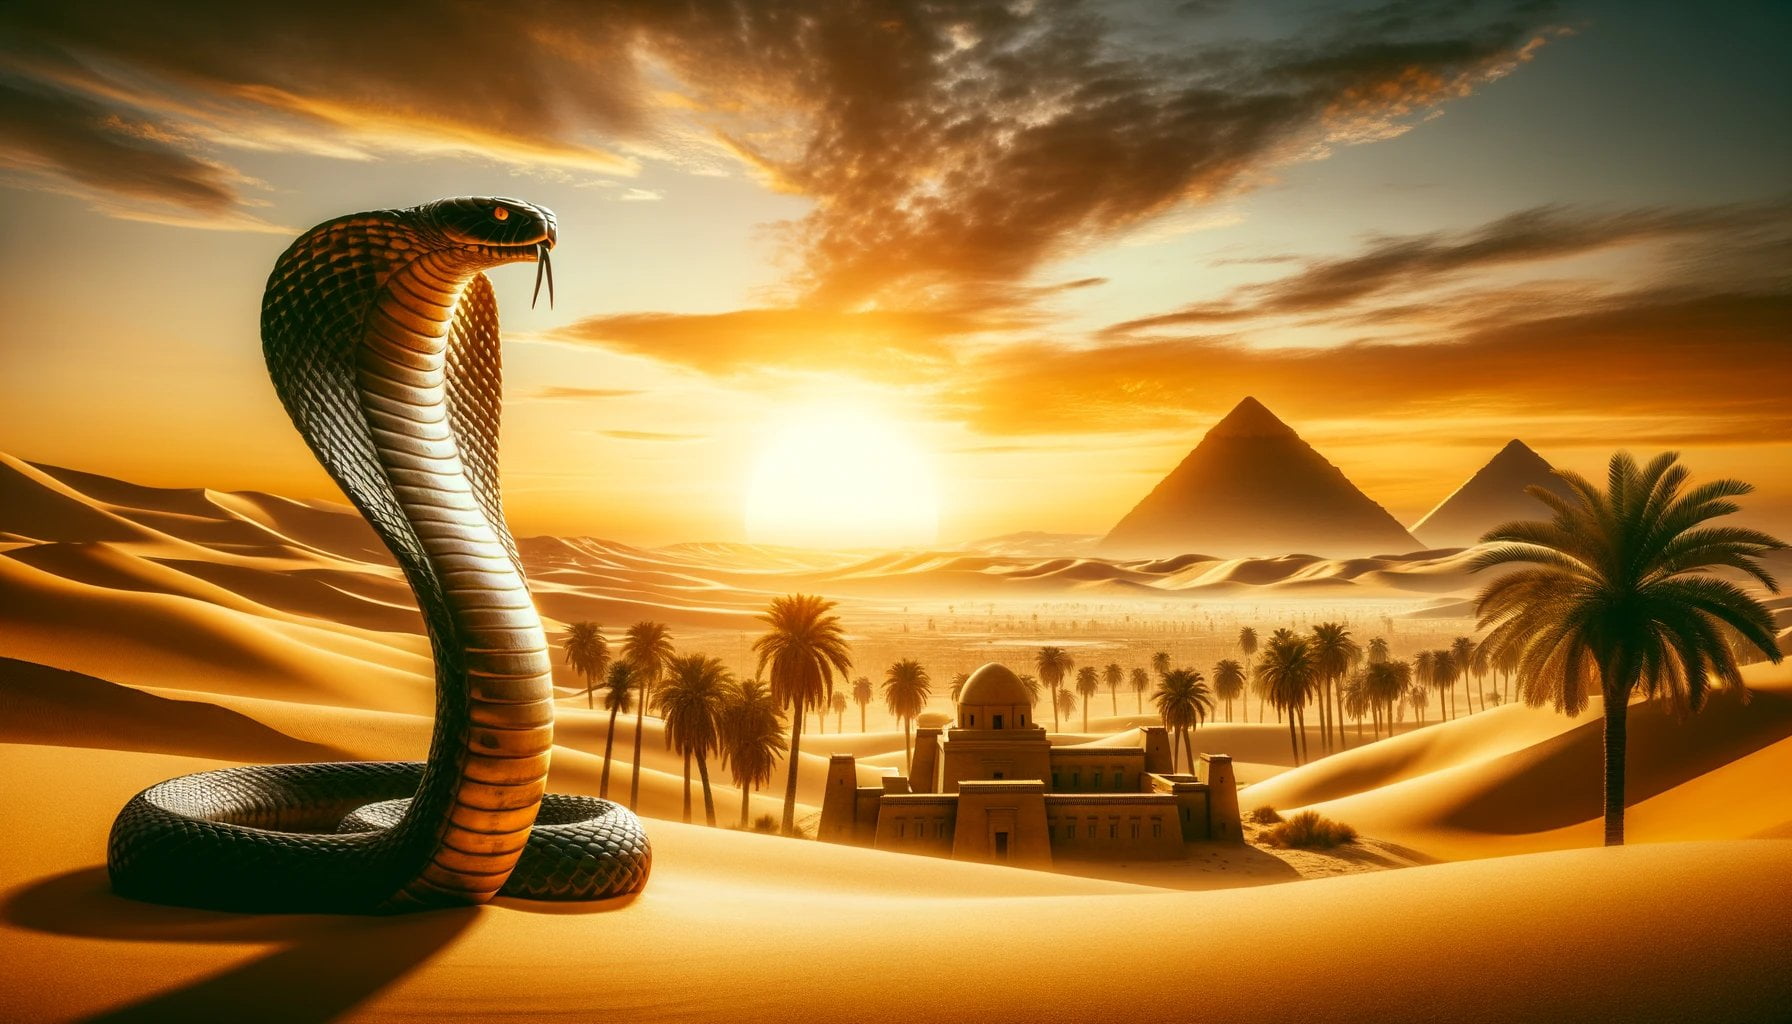 snakes of ancient egypt